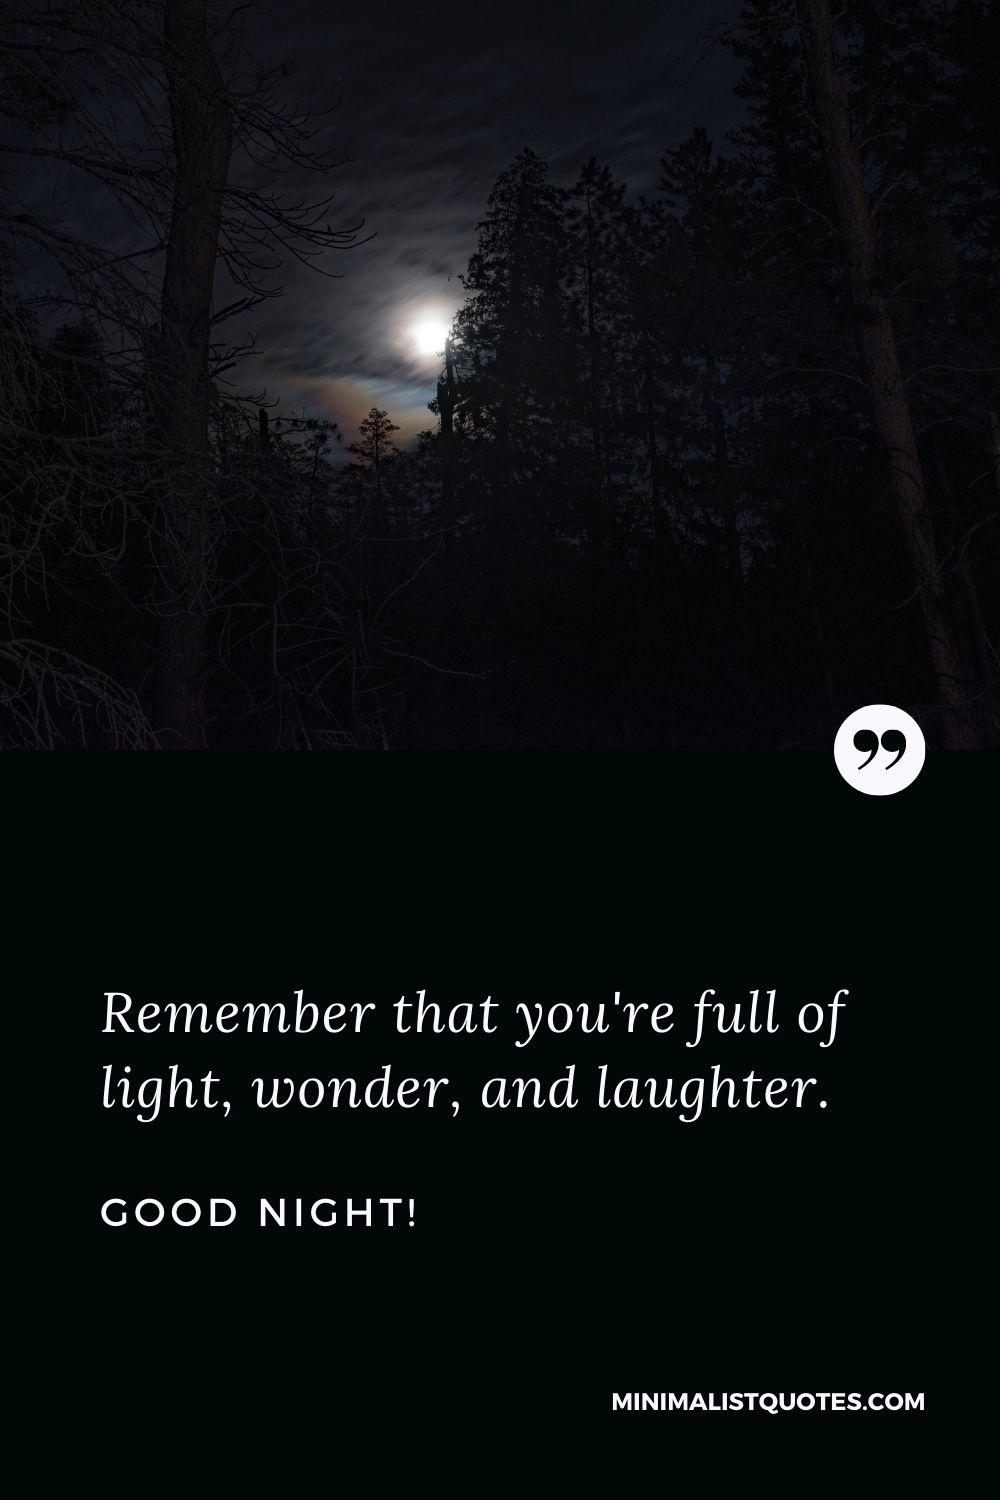 Good Night Wish & Message With Image: Remember that you're full of light, wonder, and laughter.